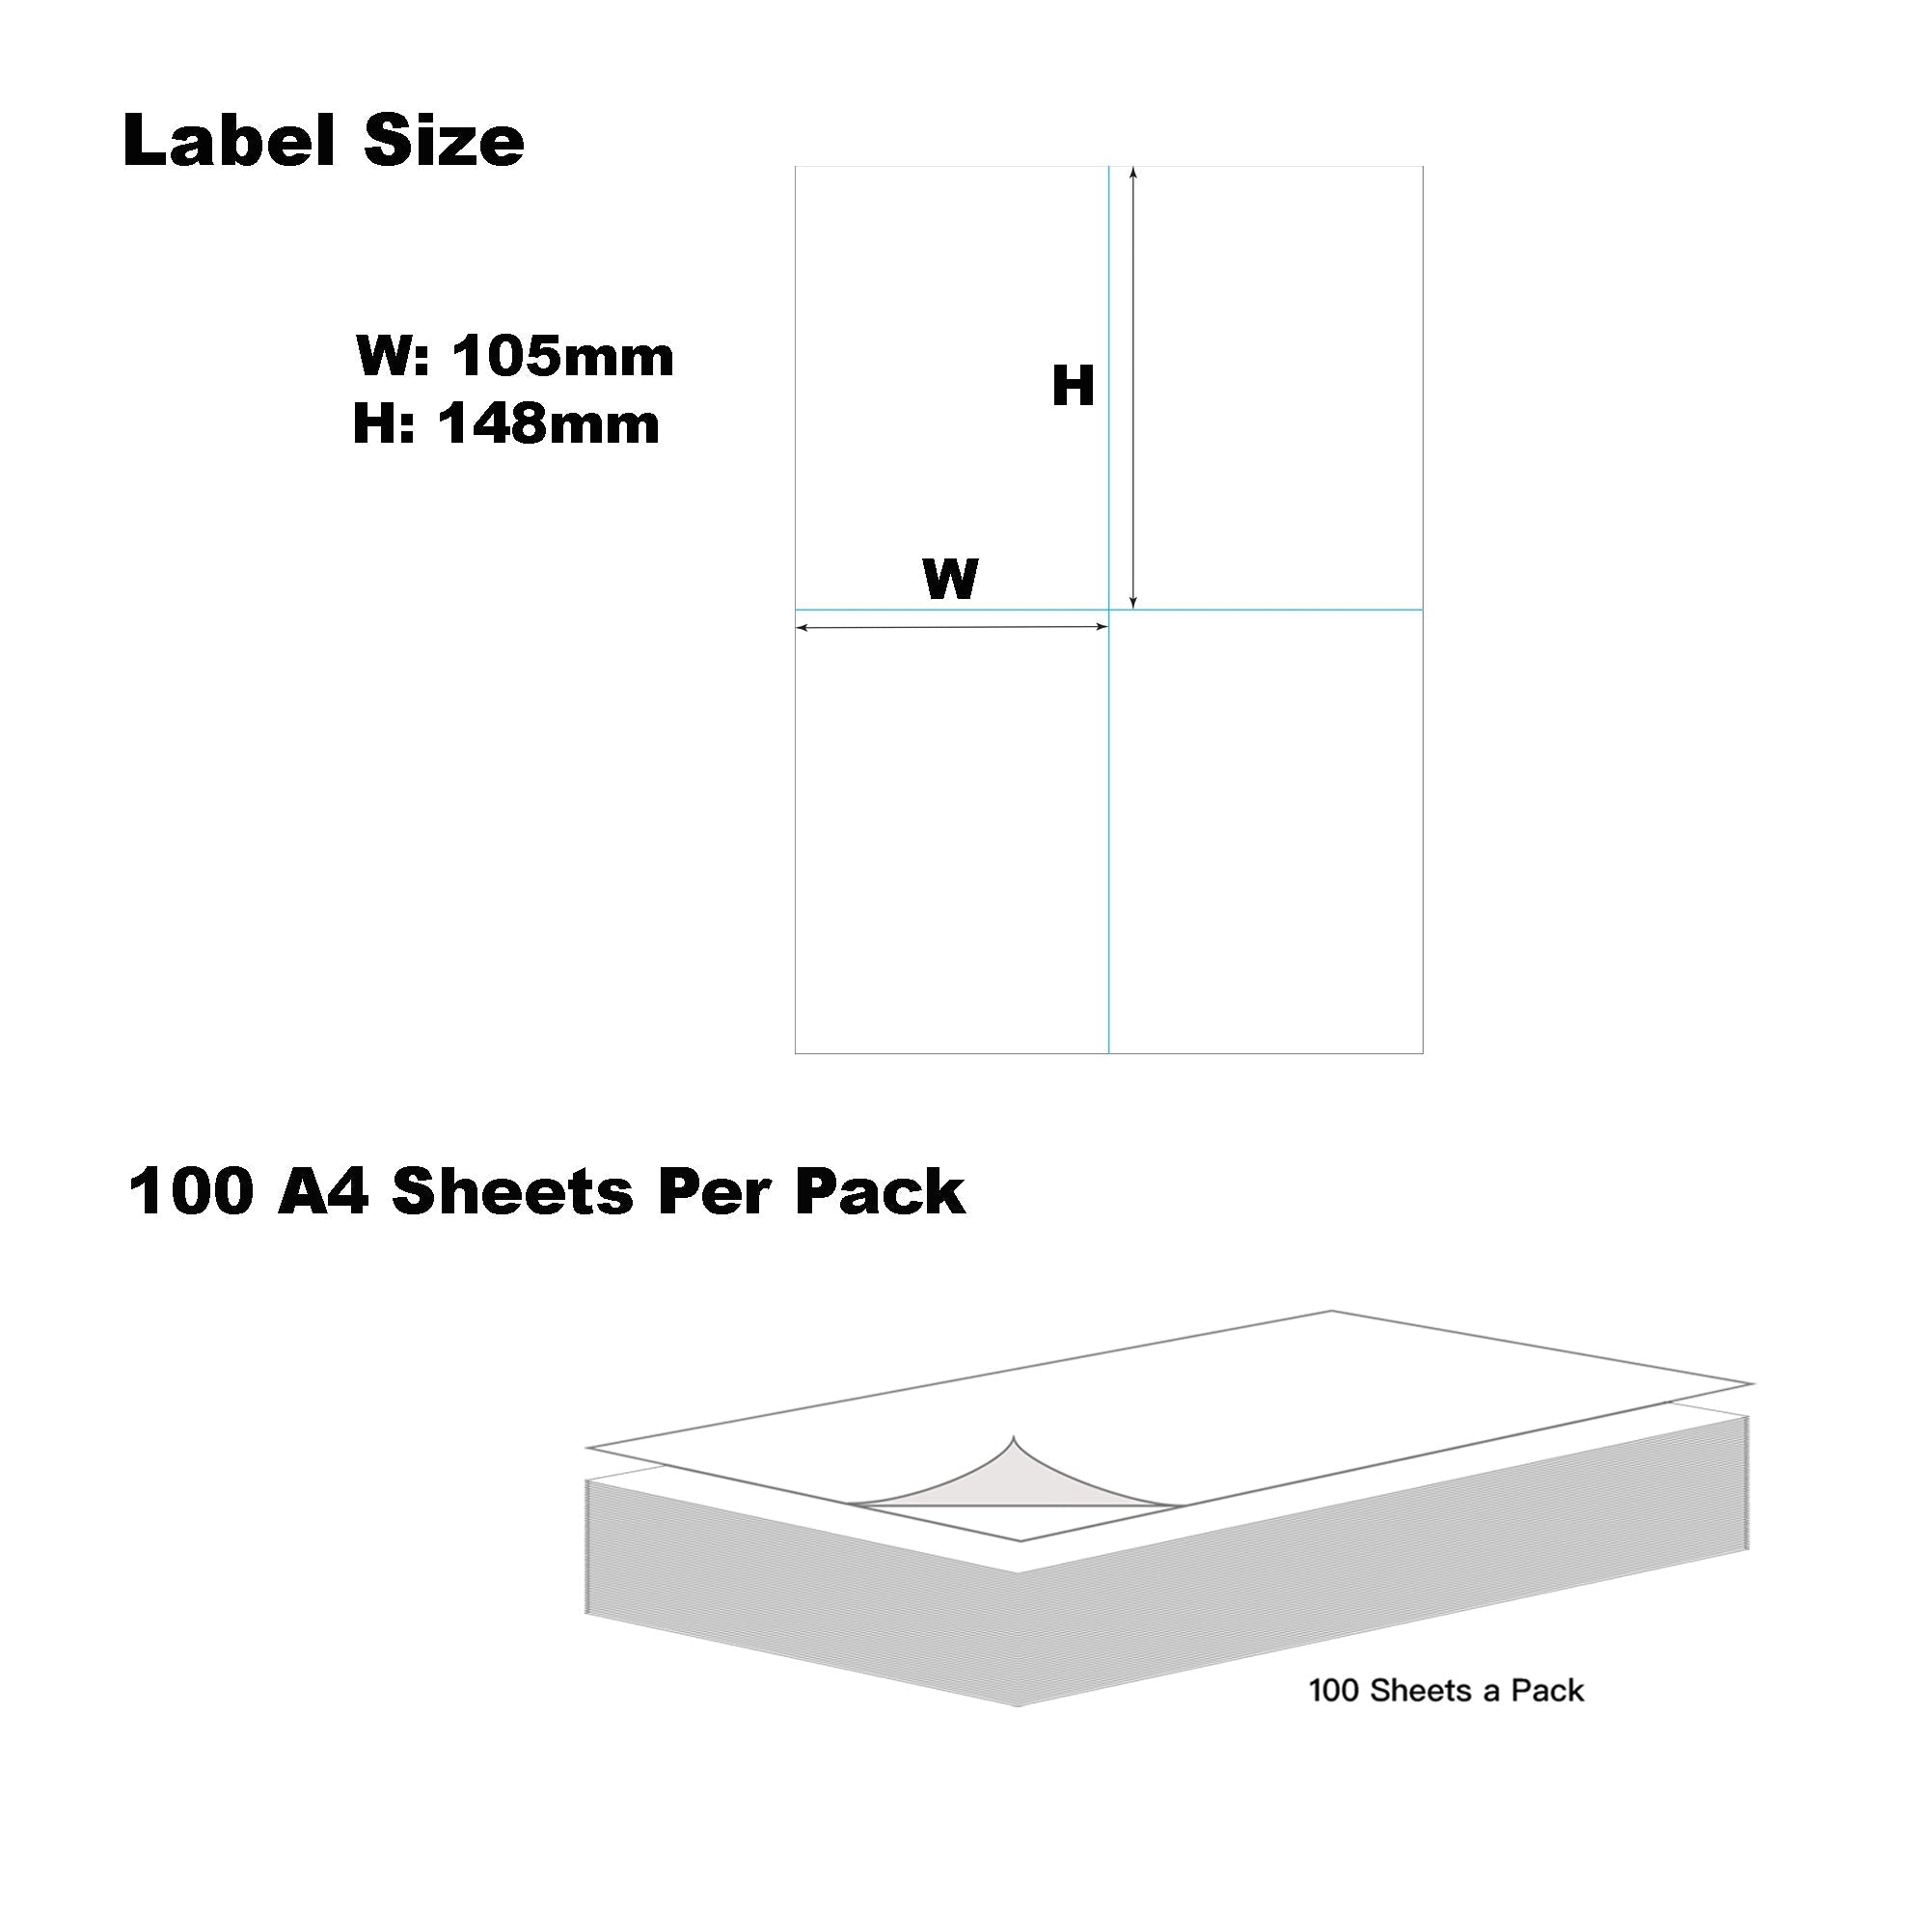 A4 Format Rectangle white 148 x 105 (Borderless) 4 Labels Per Sheet-100 Sheets